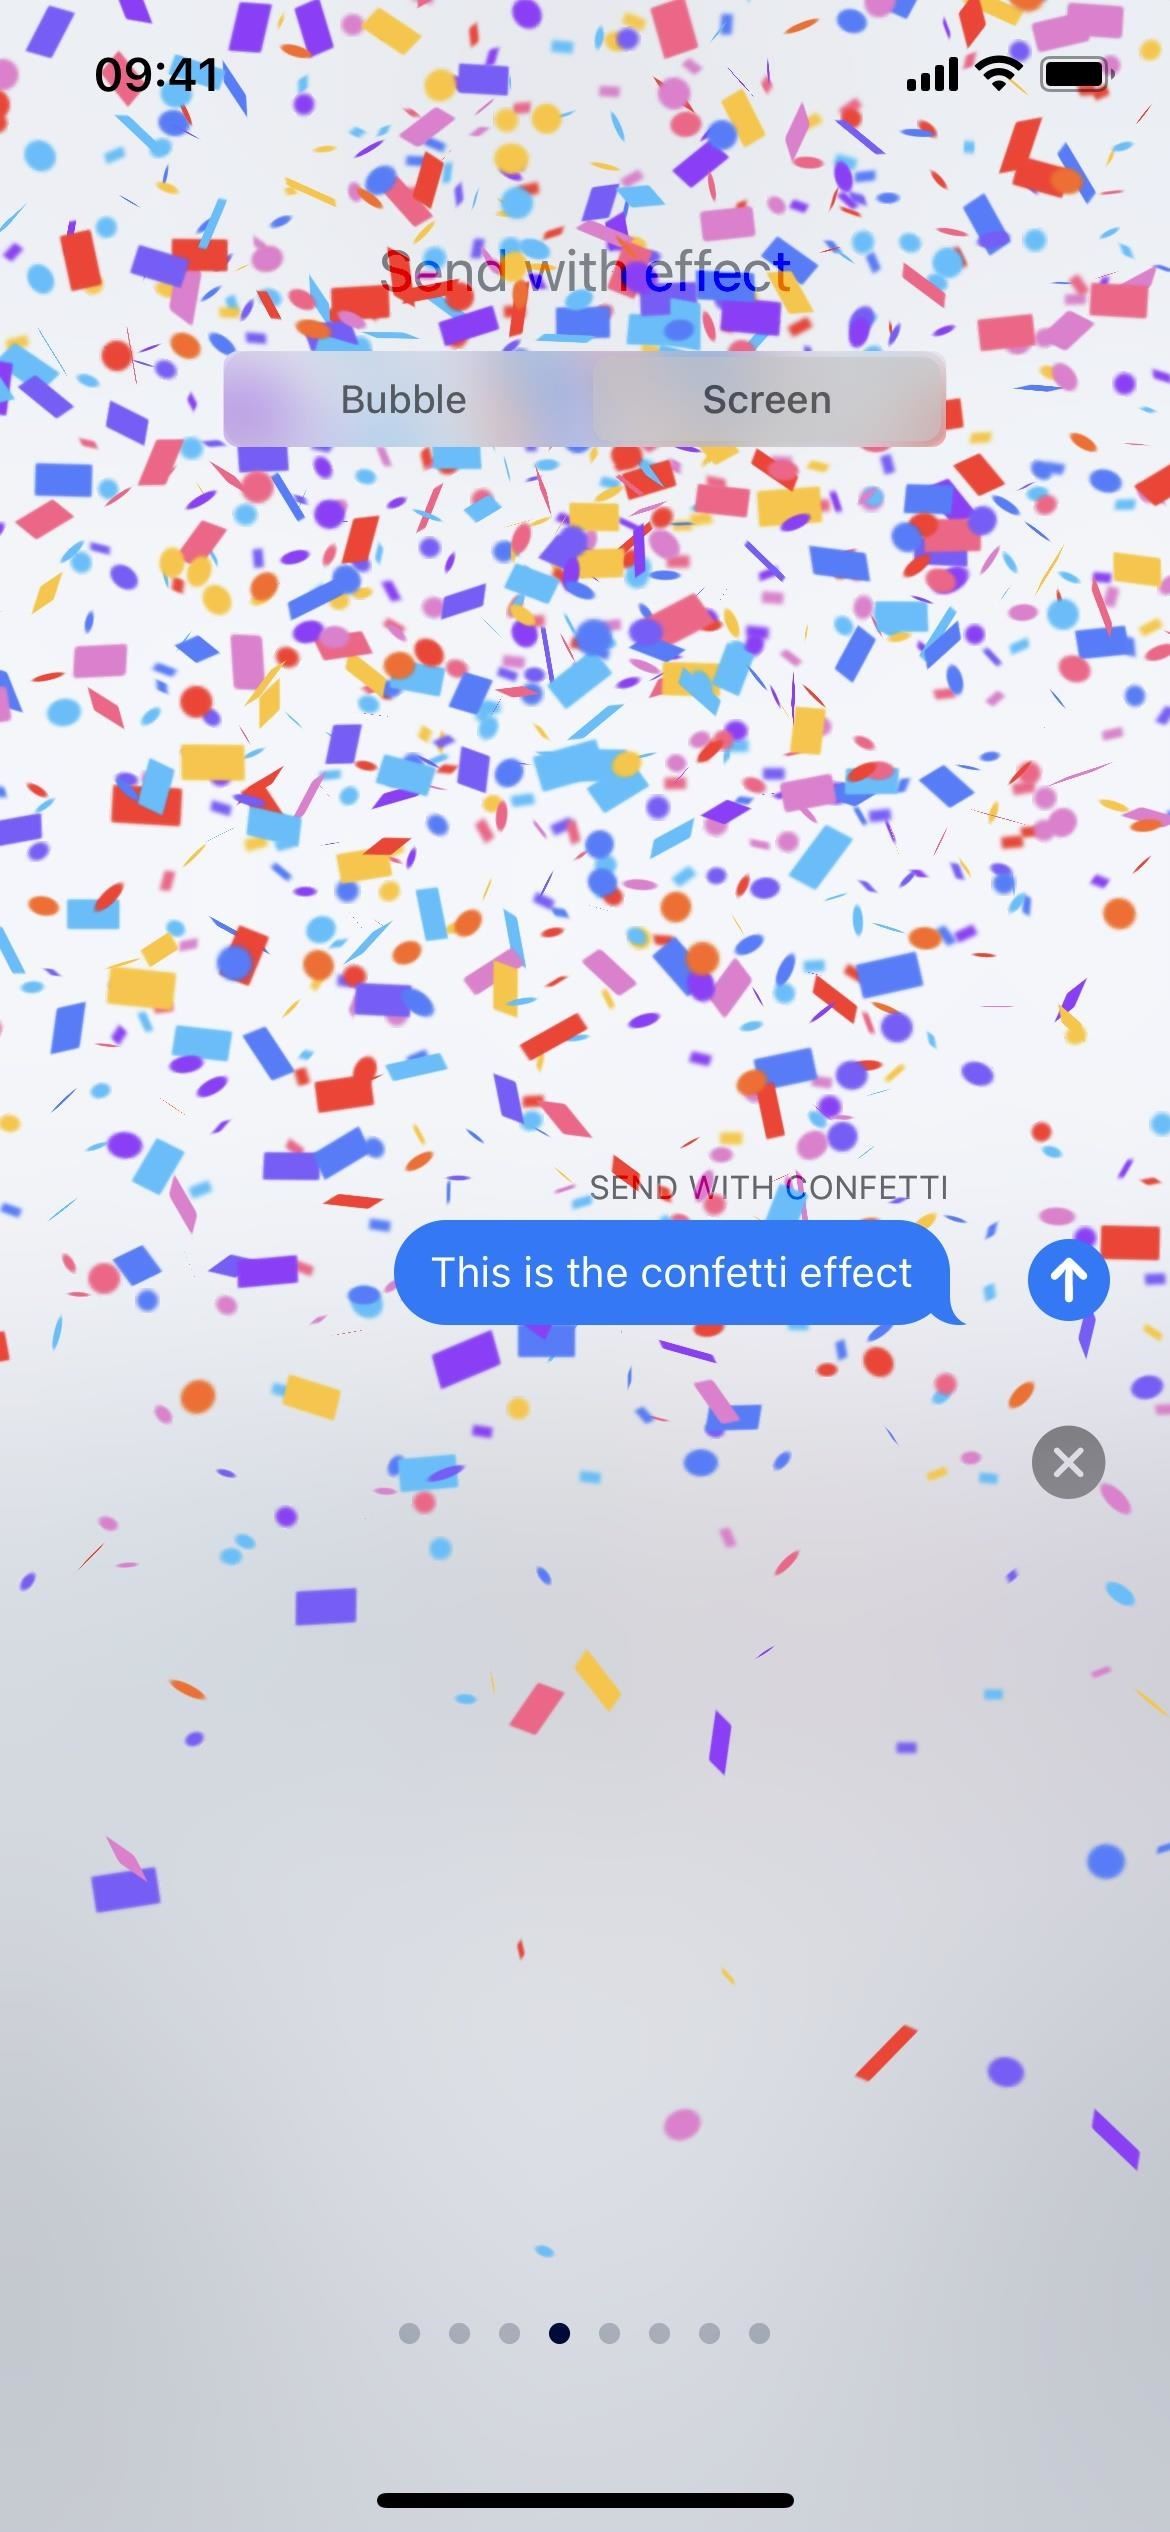 Apple's Messages App Has a Hidden Feature You Can Use Only by Doing This